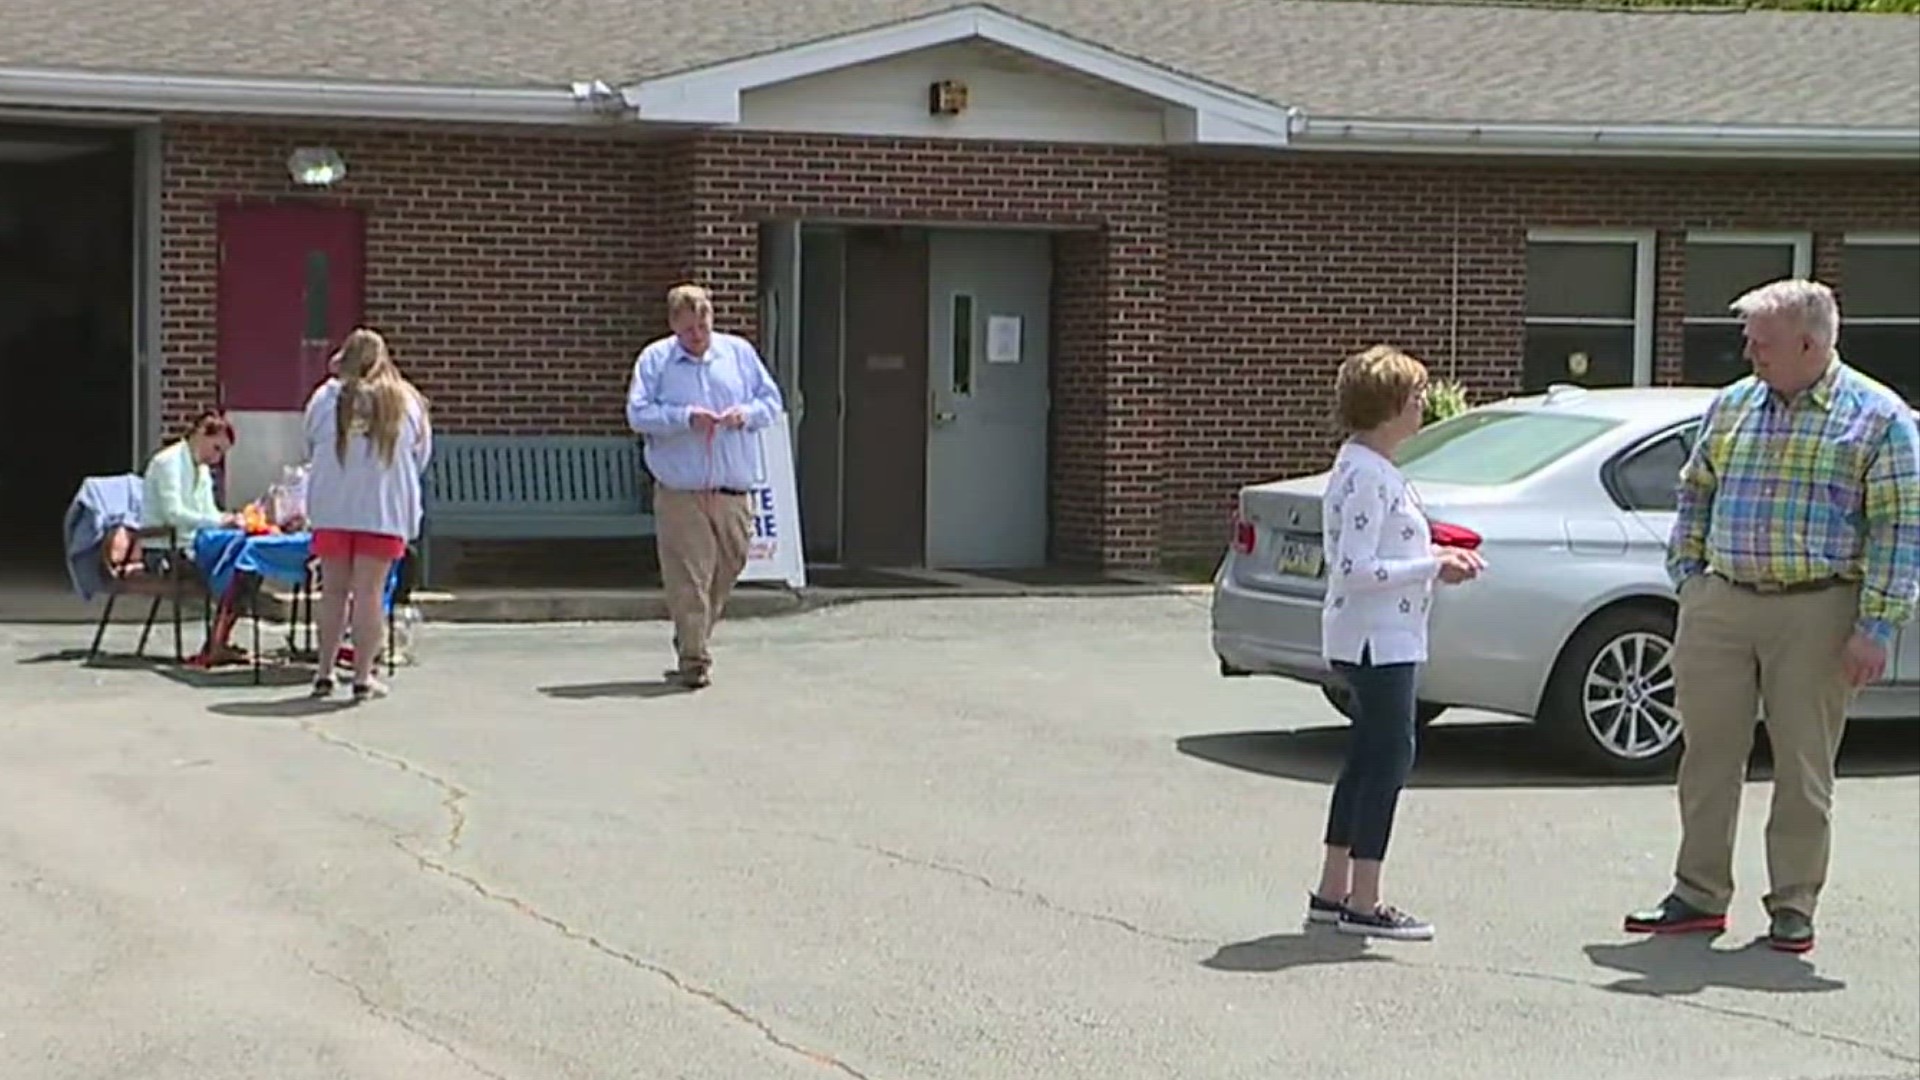 Few problems were reported for primary voters in Luzerne County precincts on Tuesday.